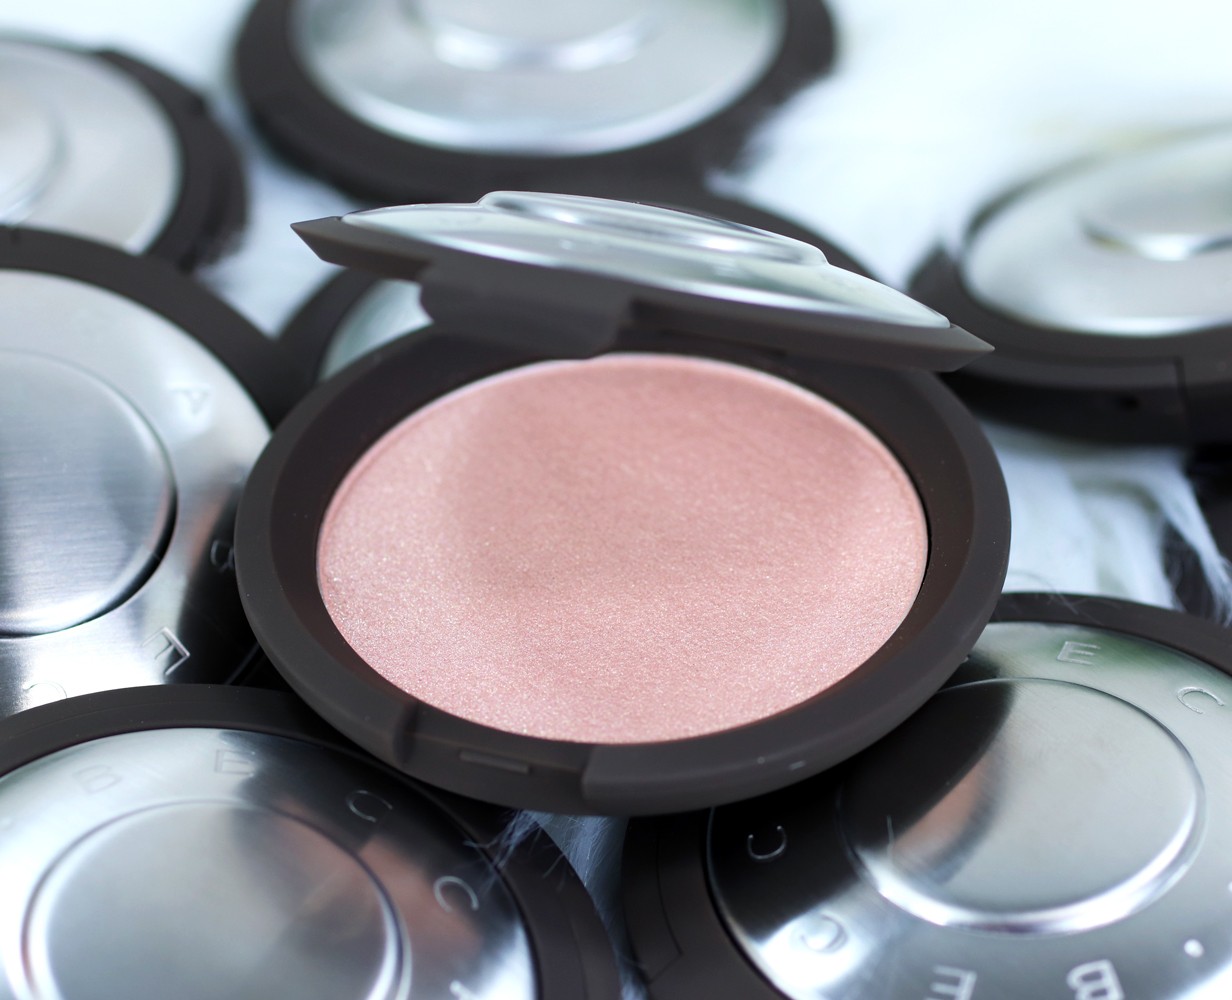 Becca Shimmering Skin Perfector Cruelty Free Highlighter Review and Swatches by Los Angeles Blogger, My Beauty Bunny